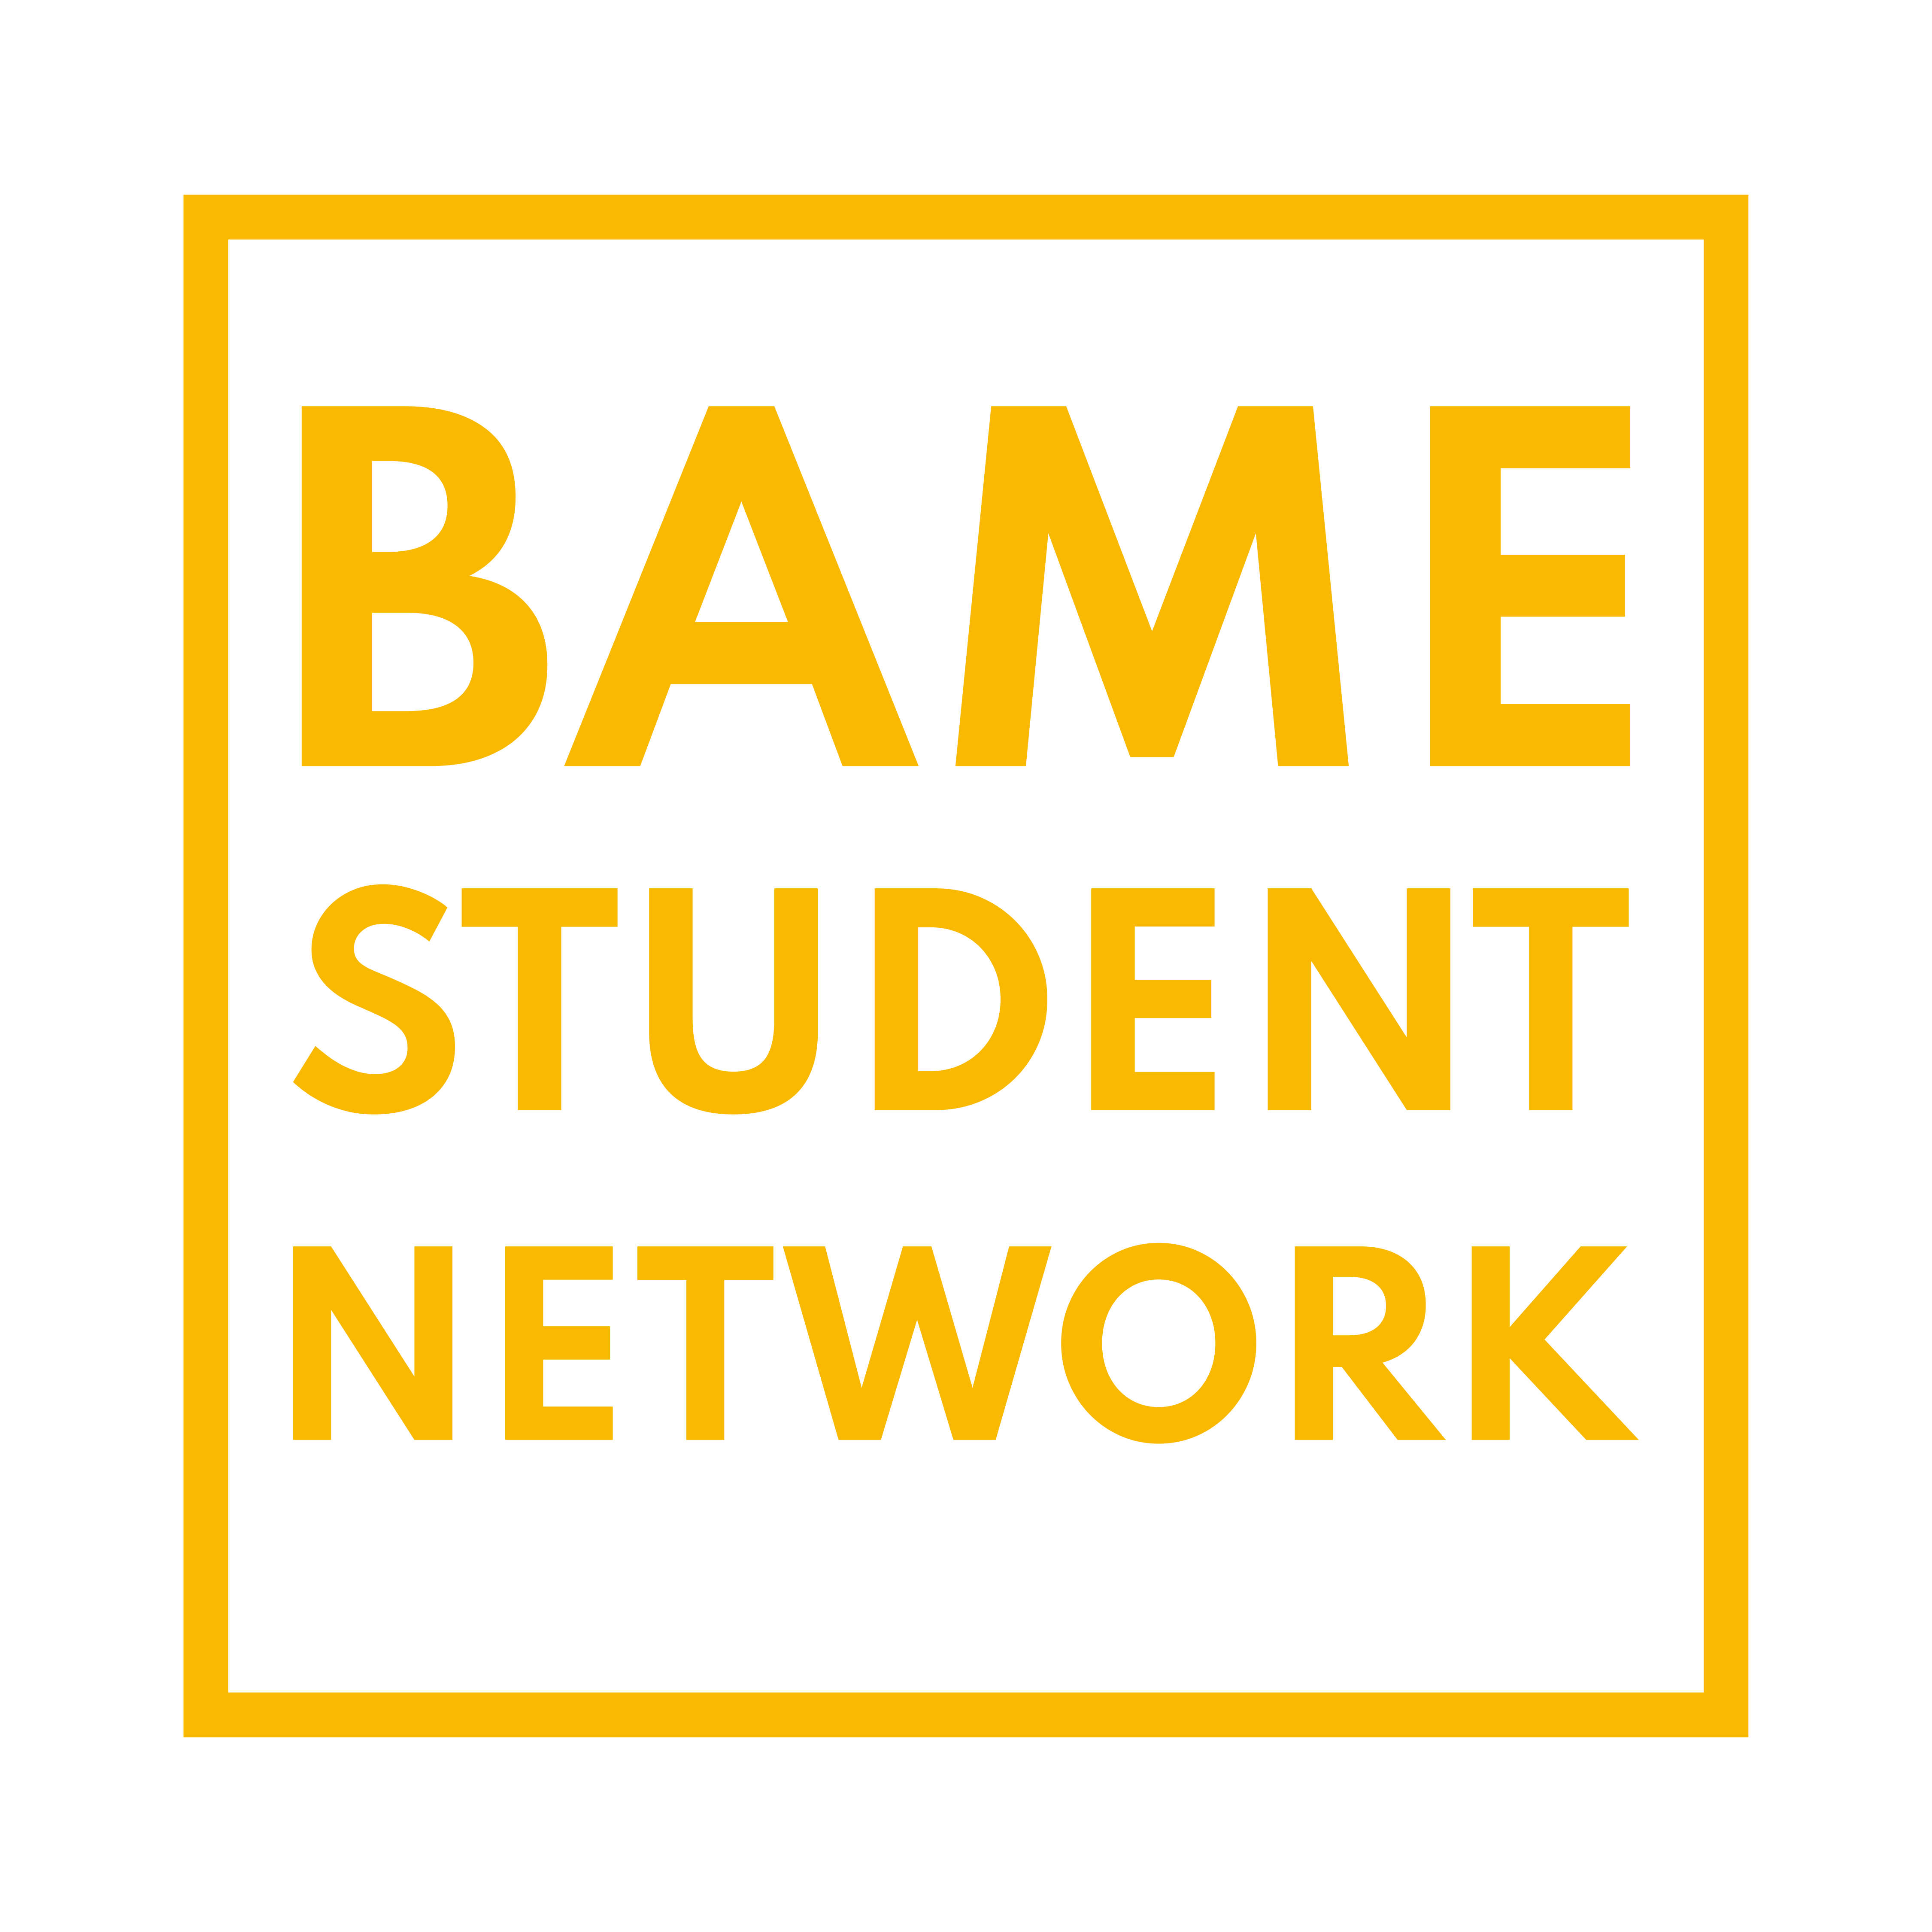 BAME Student Network